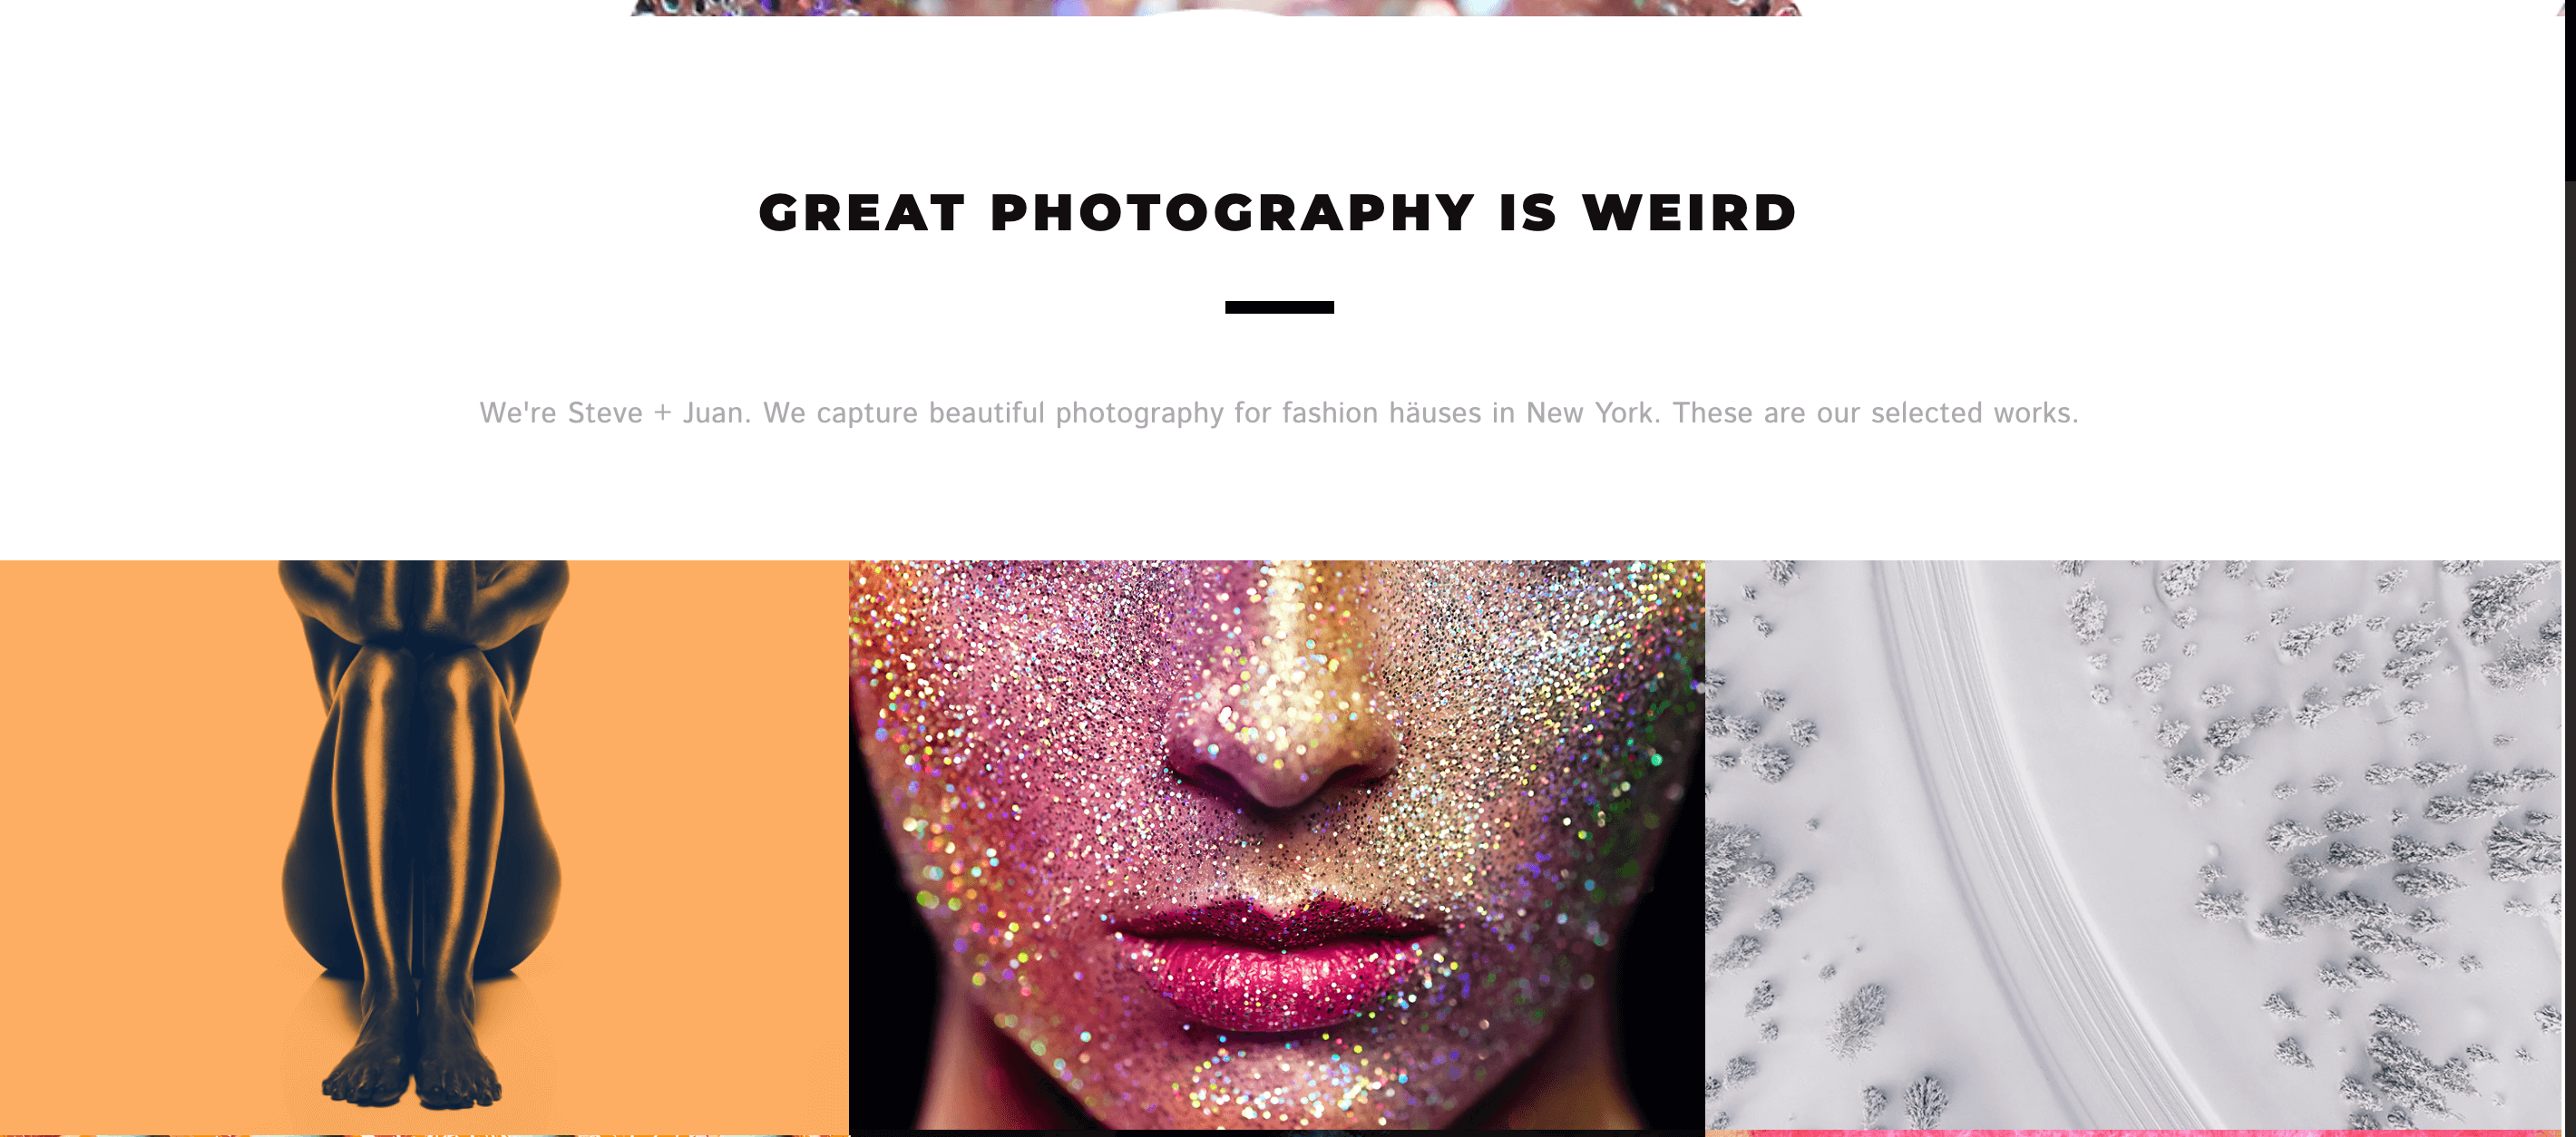 Part of 94 Photography's website featuring the words "Great Photography is Weird" and photos of a shiny model, a model with glitter covering their face, and an aerial view of a forest covered in snow